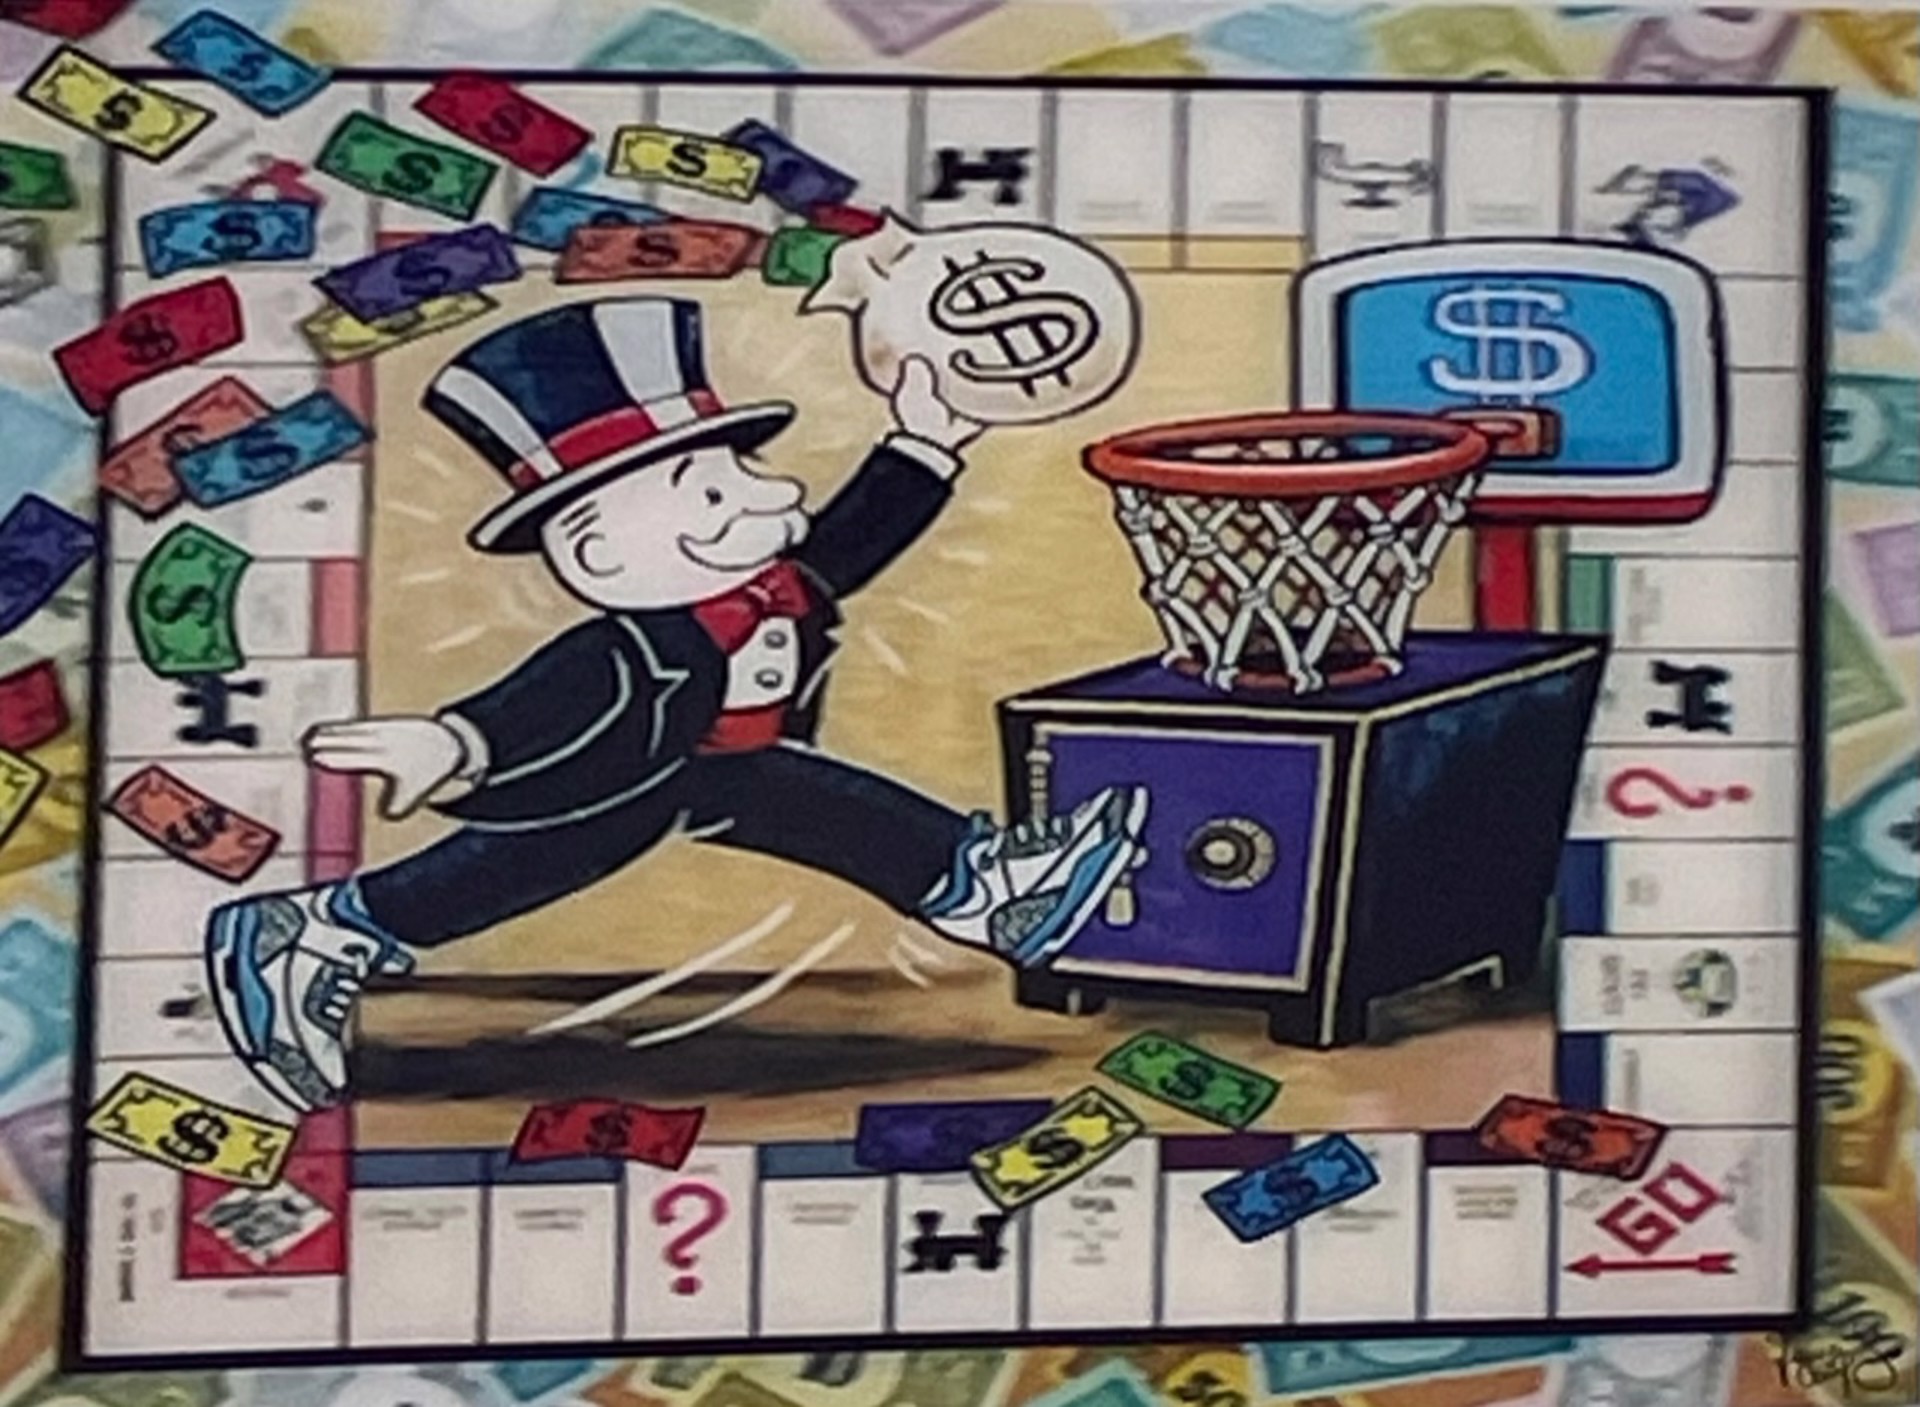 3D Monopoly Man Basketball by Laura Curiel